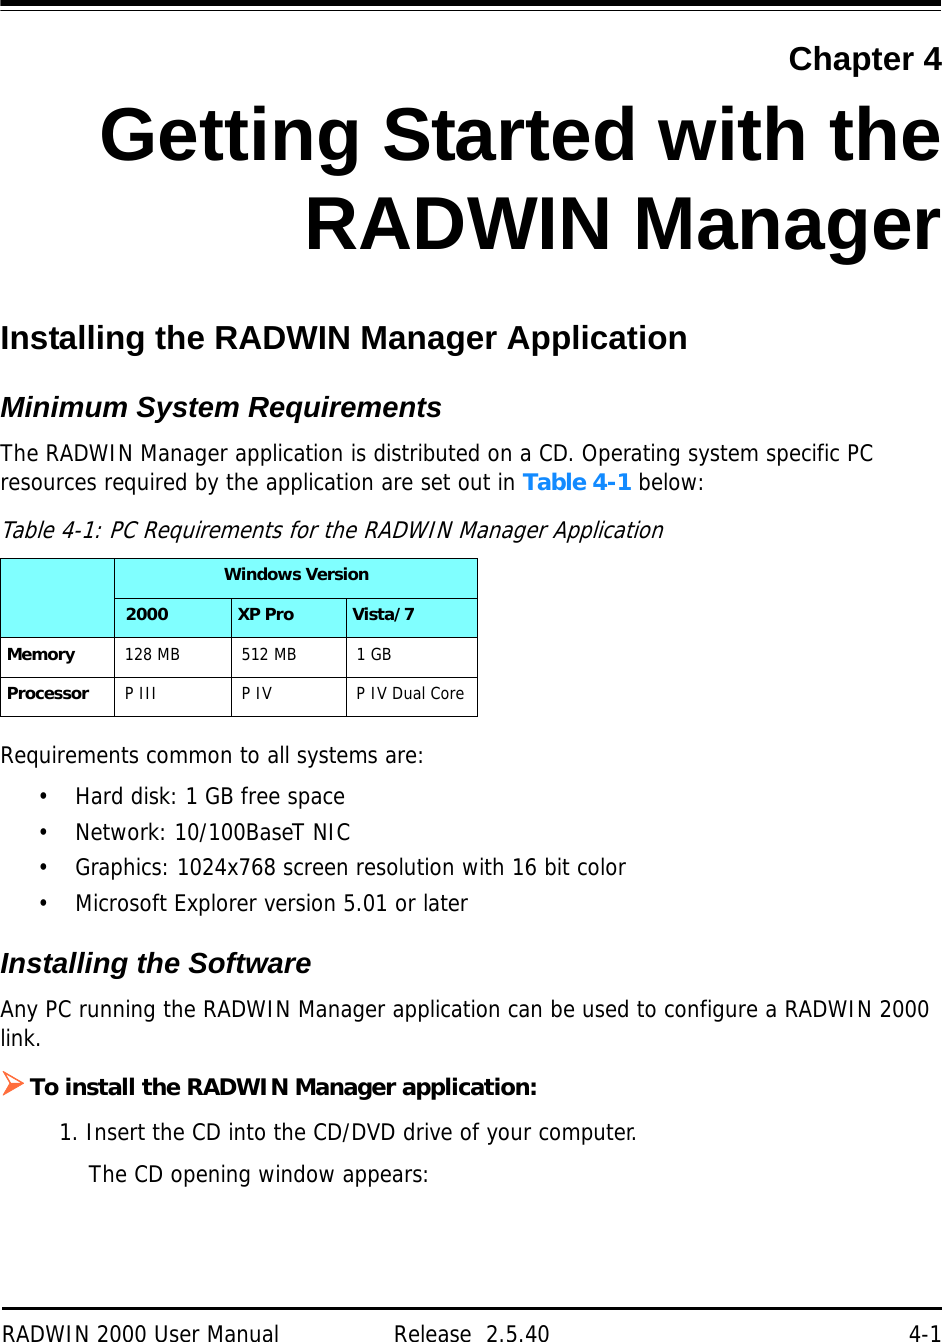 RADWIN 2000 User Manual Release  2.5.40 4-1Chapter 4Getting Started with theRADWIN ManagerInstalling the RADWIN Manager ApplicationMinimum System RequirementsThe RADWIN Manager application is distributed on a CD. Operating system specific PC resources required by the application are set out in Table 4-1 below:Requirements common to all systems are:• Hard disk: 1 GB free space• Network: 10/100BaseT NIC• Graphics: 1024x768 screen resolution with 16 bit color• Microsoft Explorer version 5.01 or laterInstalling the SoftwareAny PC running the RADWIN Manager application can be used to configure a RADWIN 2000 link.To install the RADWIN Manager application:1. Insert the CD into the CD/DVD drive of your computer.The CD opening window appears:Table 4-1: PC Requirements for the RADWIN Manager ApplicationWindows Version 2000 XP Pro Vista/7Memory 128 MB 512 MB 1 GBProcessor P III P IV P IV Dual Core